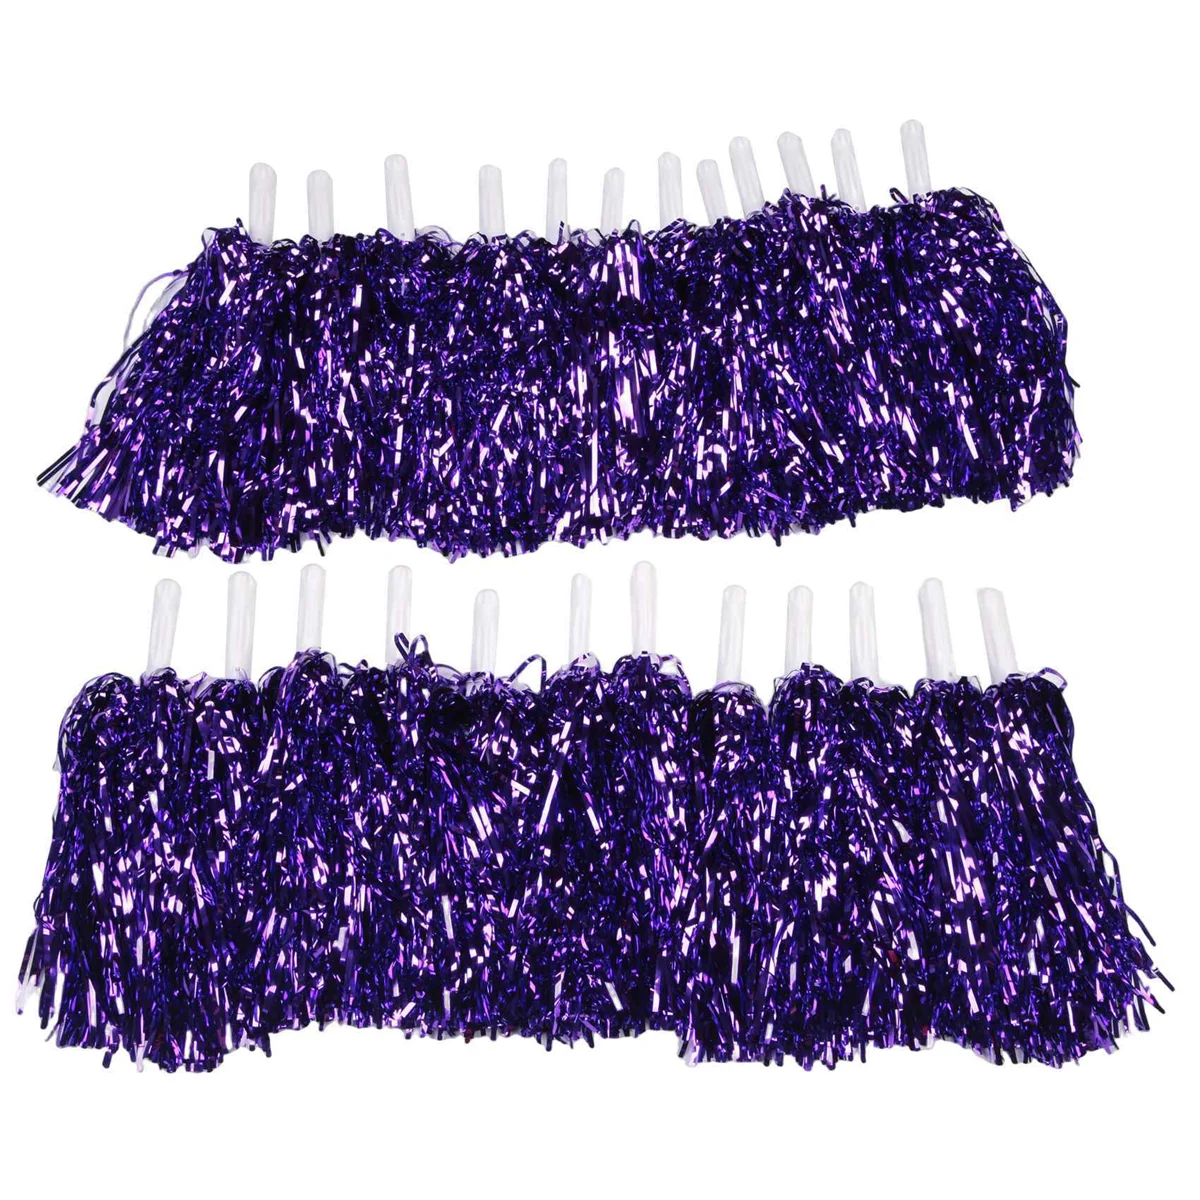 

24Pcs Cheerleading Pom Poms Metallic Foil Cheer Pom Poms with Plastic Handle for Adults Kids Cheerleaders Party Purple